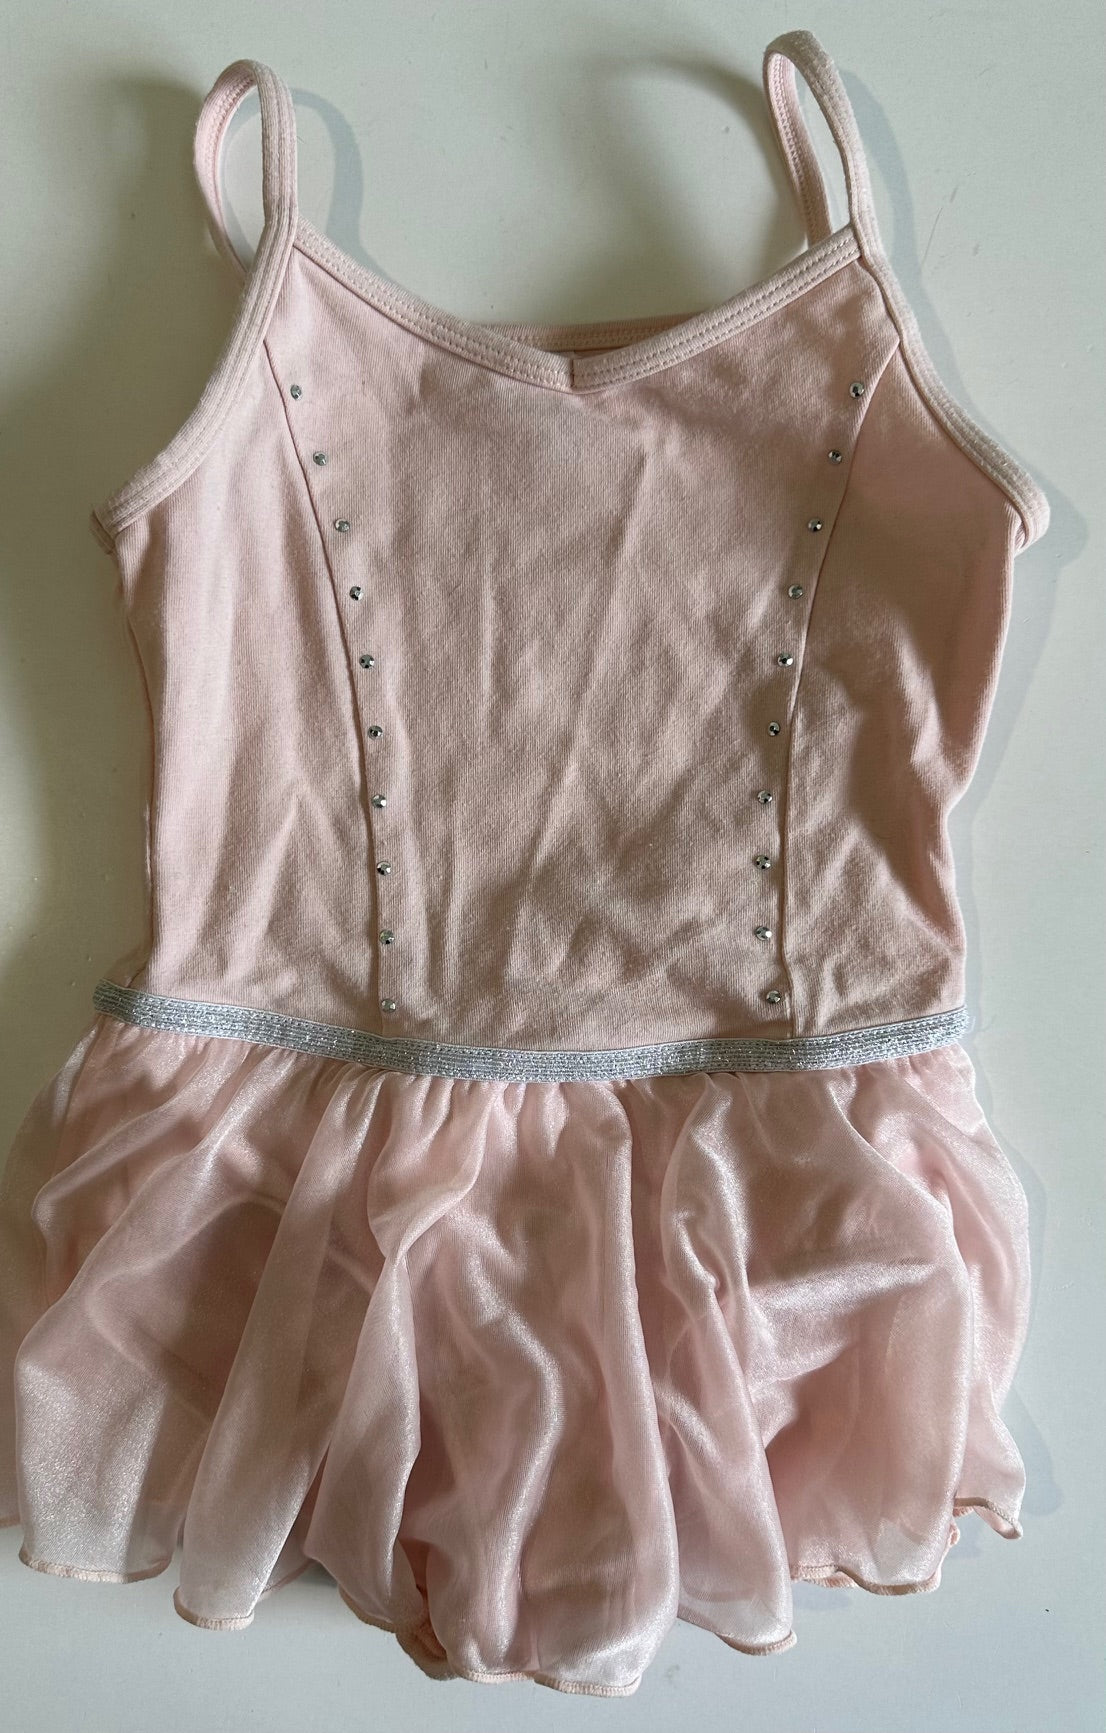 *Play* More Than Magic, Pink Dance Suit with Tutu Skirt - Size Small (6/6X)